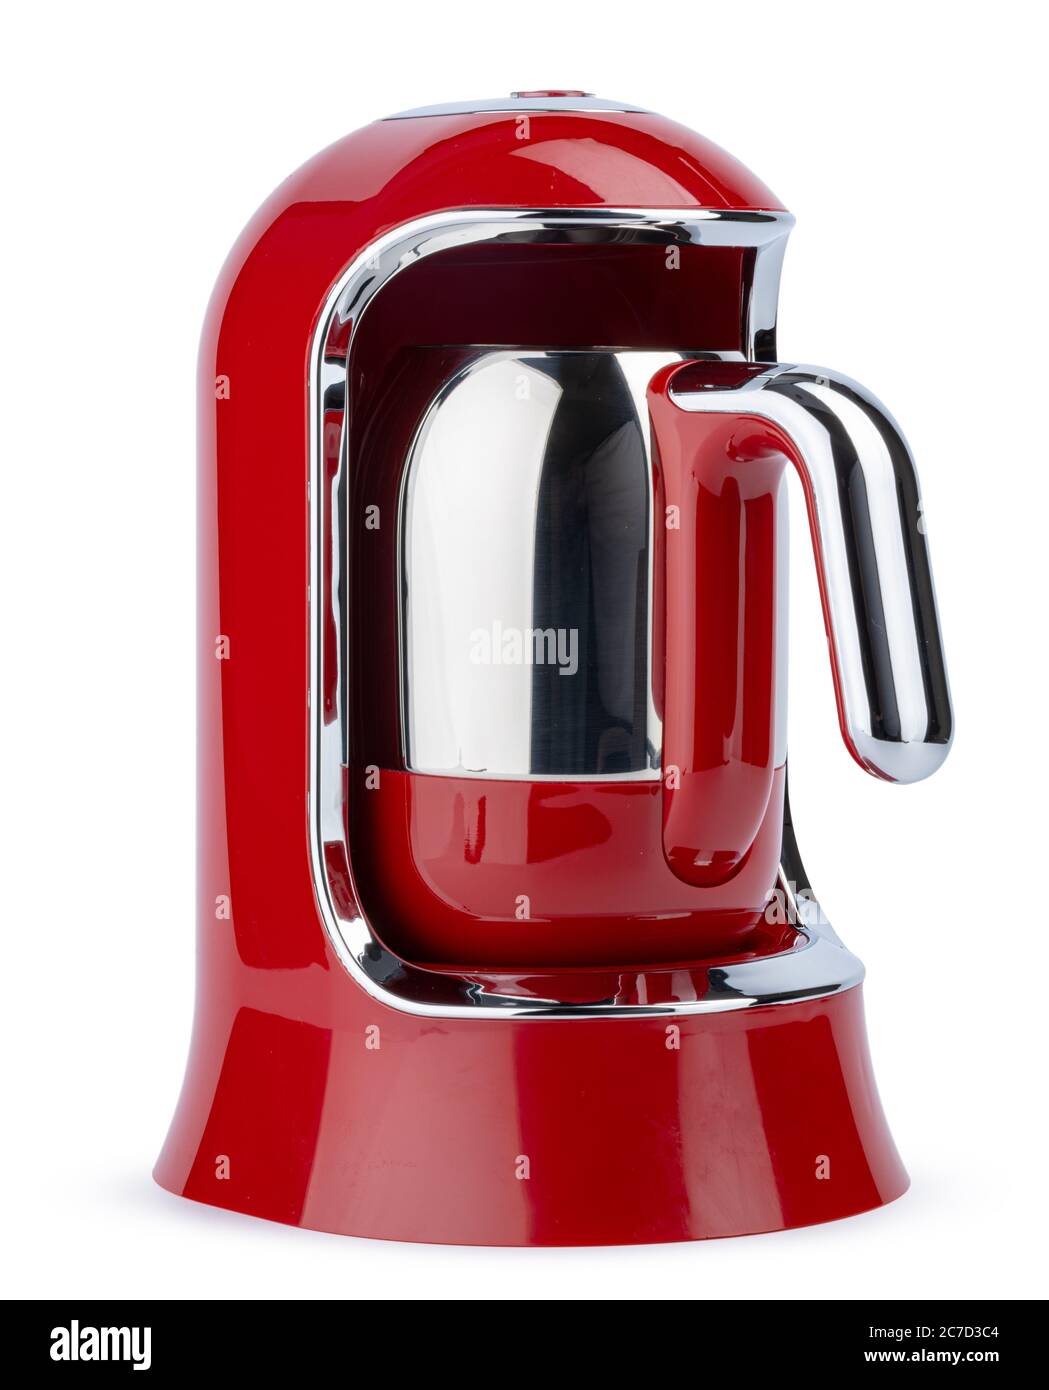 https://c8.alamy.com/comp/2C7D3C4/electric-kettle-on-a-stand-isolated-on-white-2C7D3C4.jpg